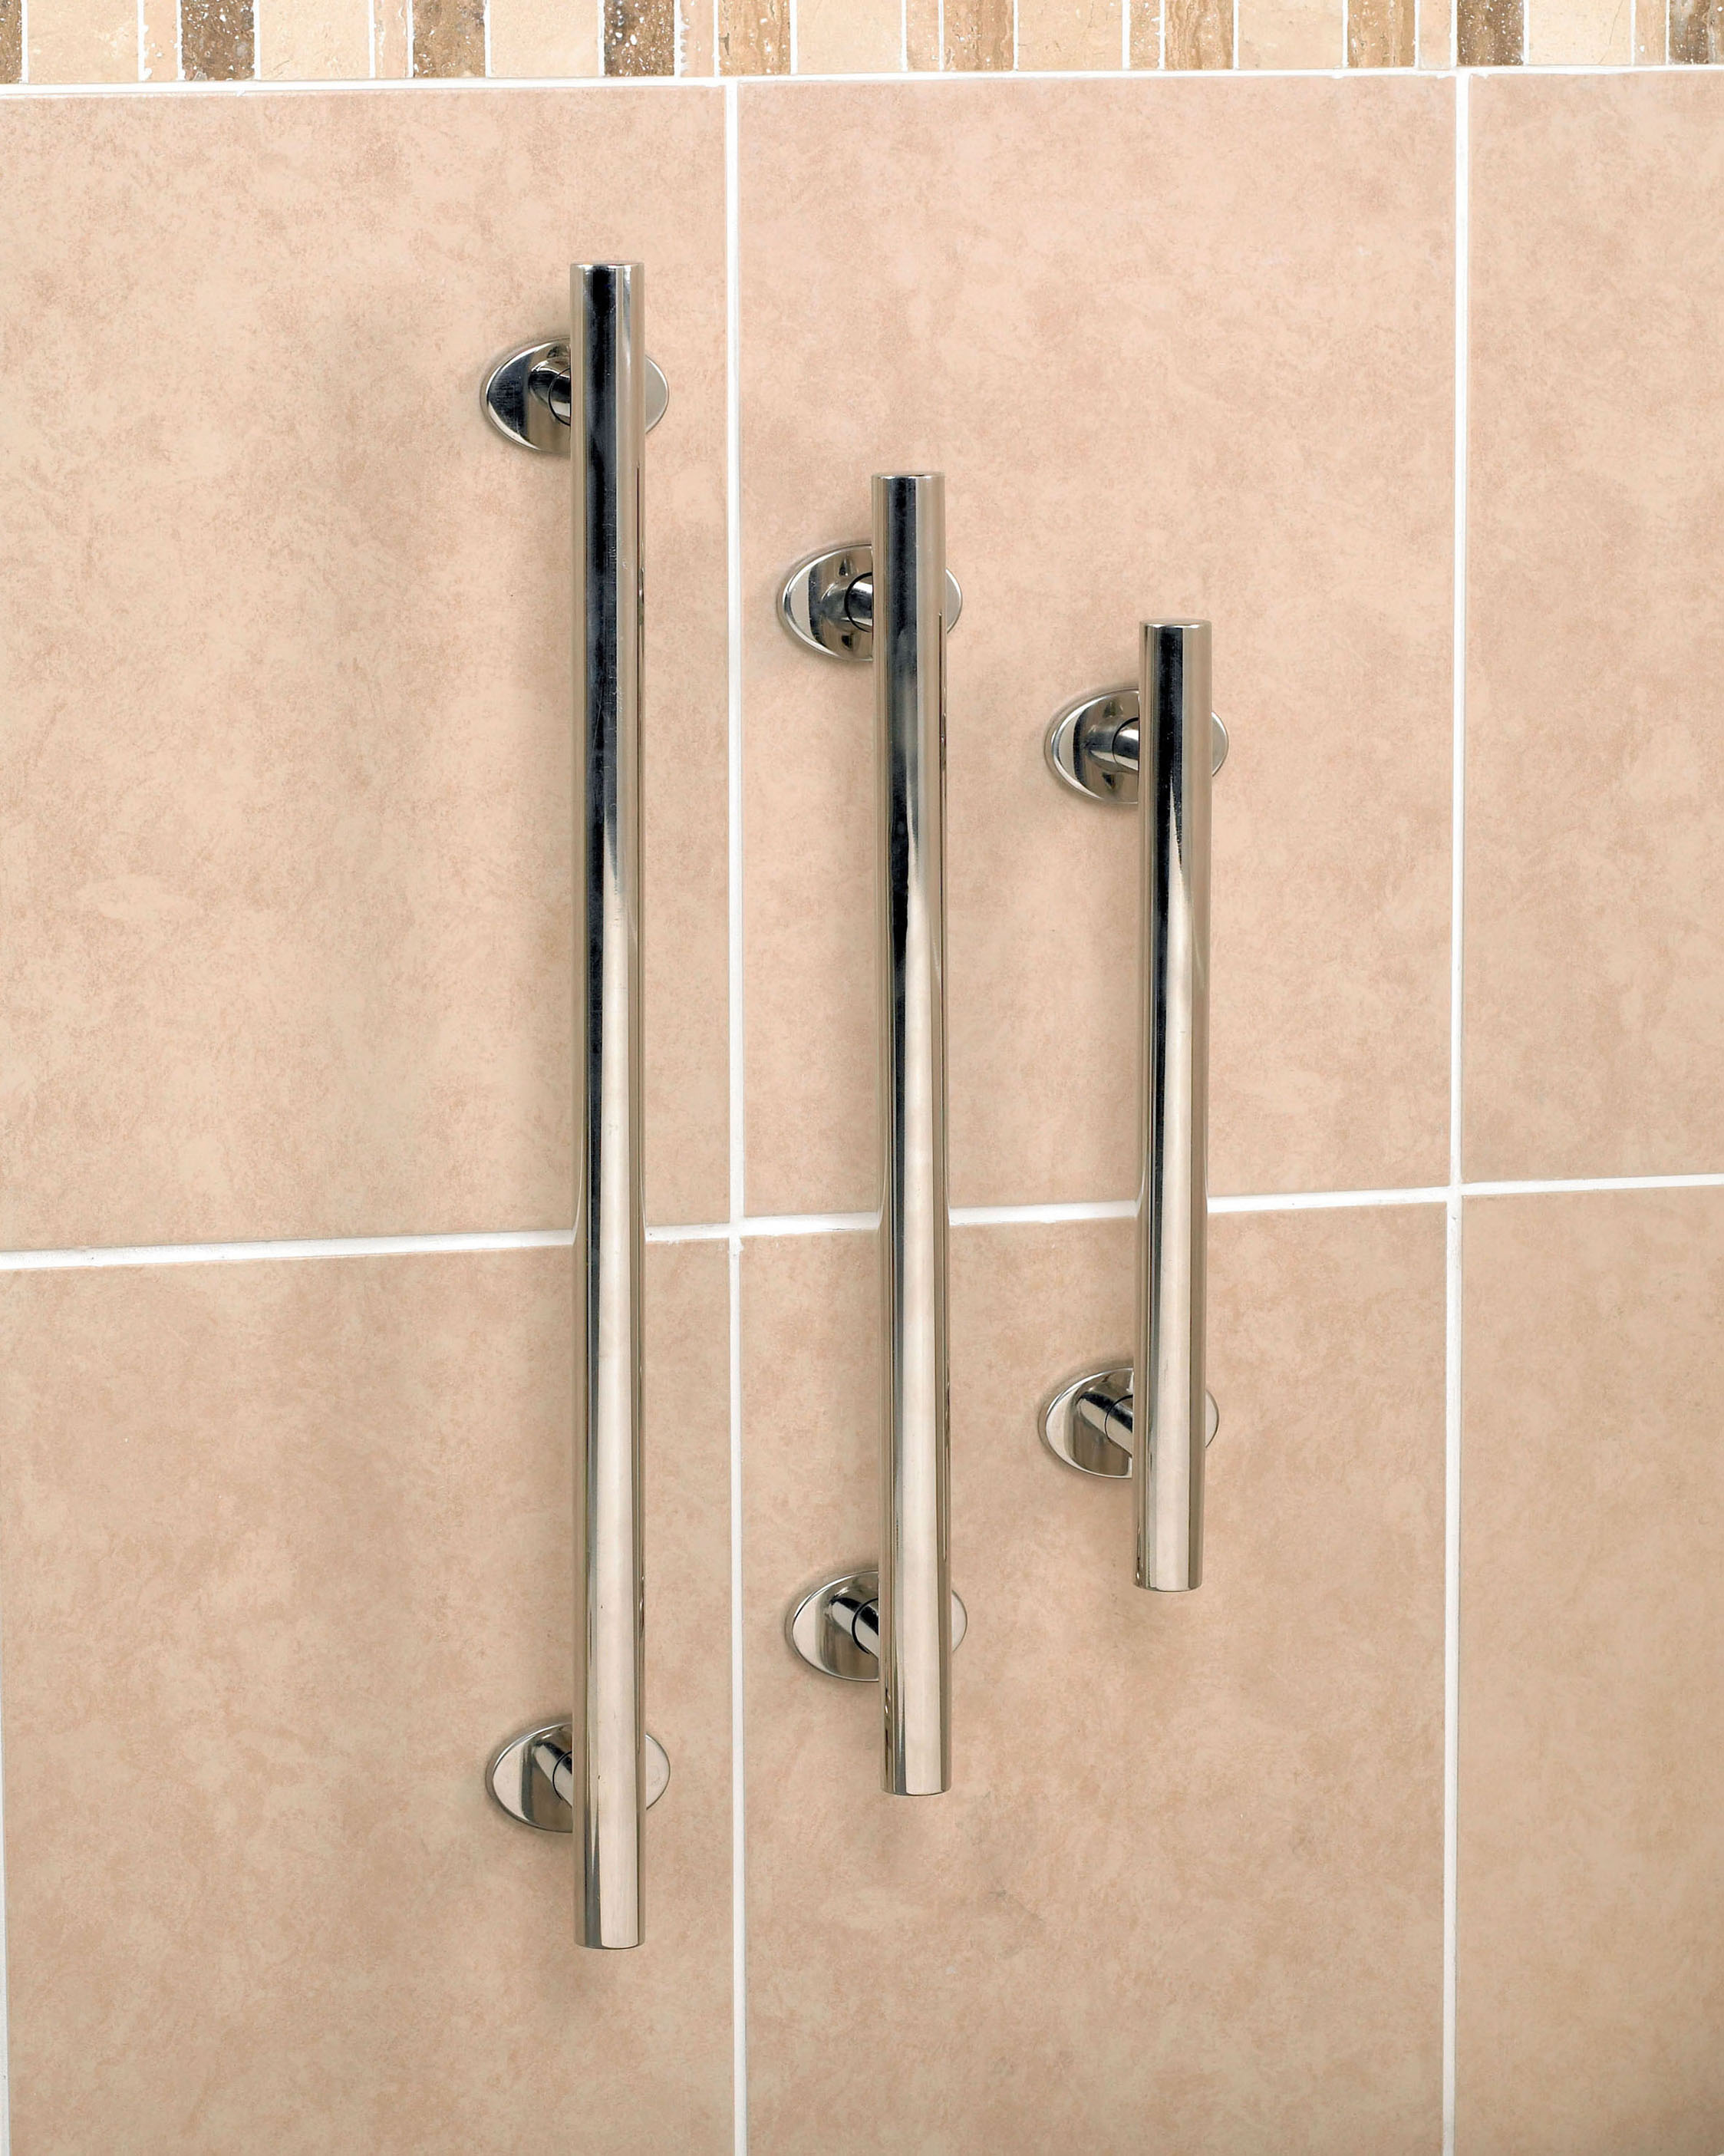 Grab rails are one of the easiest things to install to create a disabled-friendly bathroom